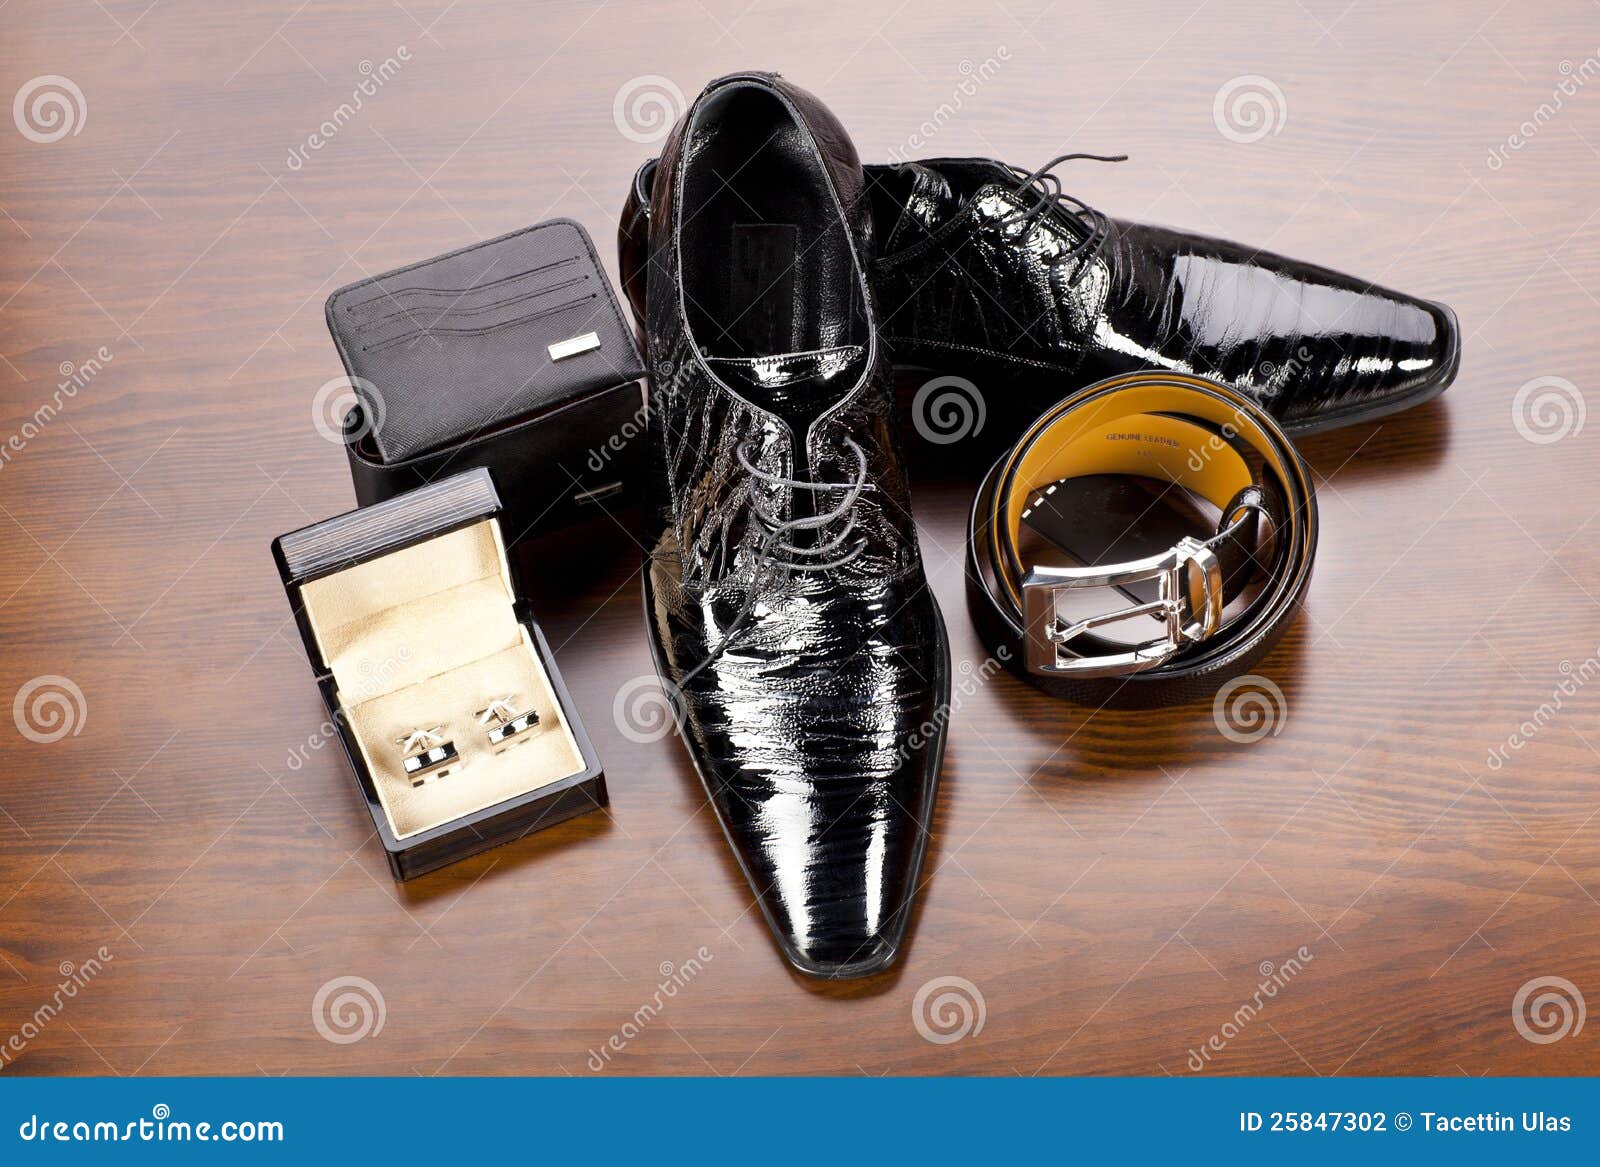 Men's Accessories Stock Photography - Image: 25847302